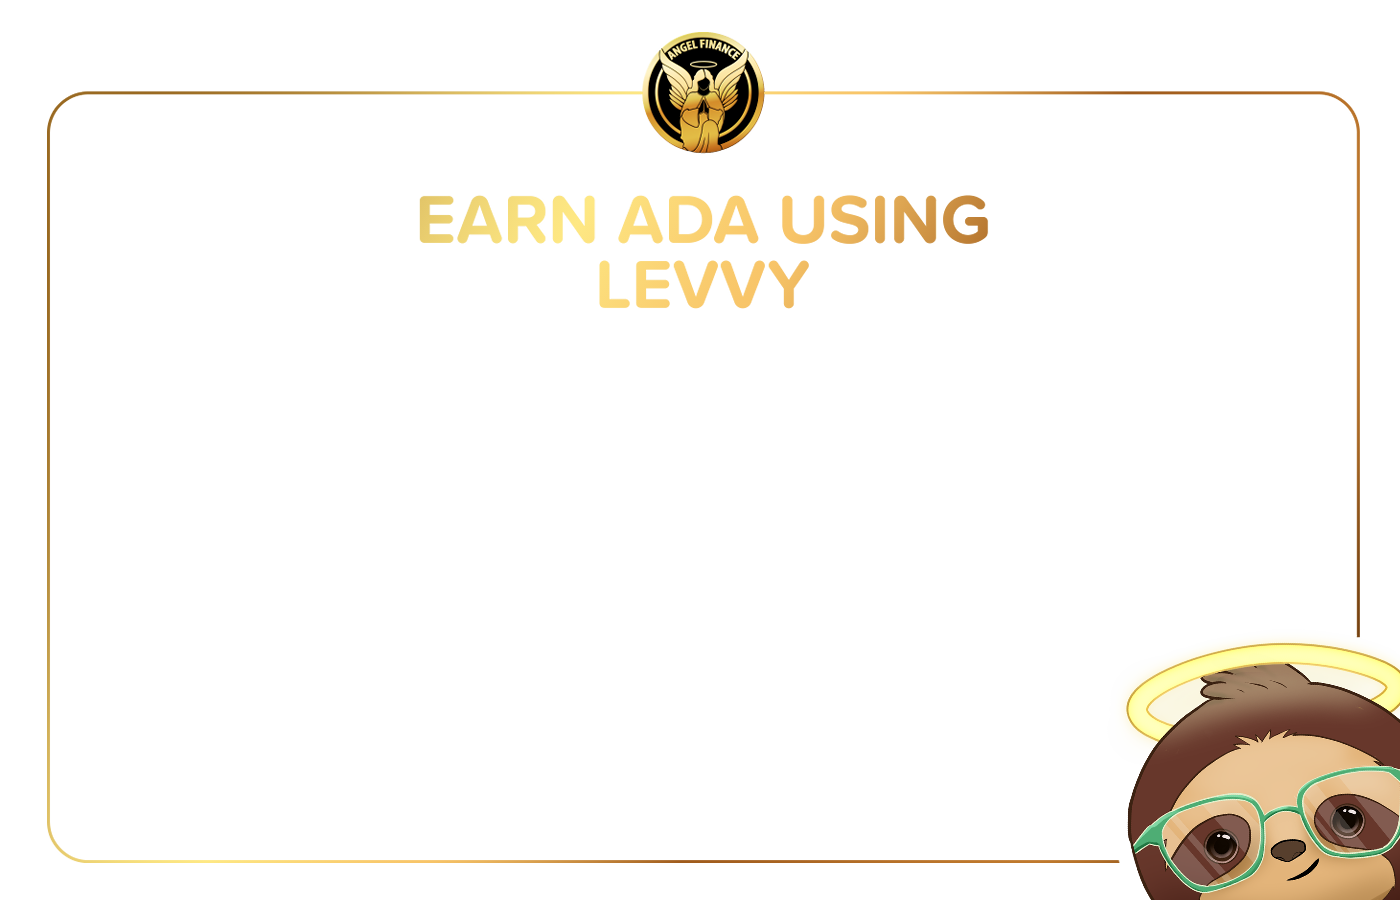 Earn with Levvy